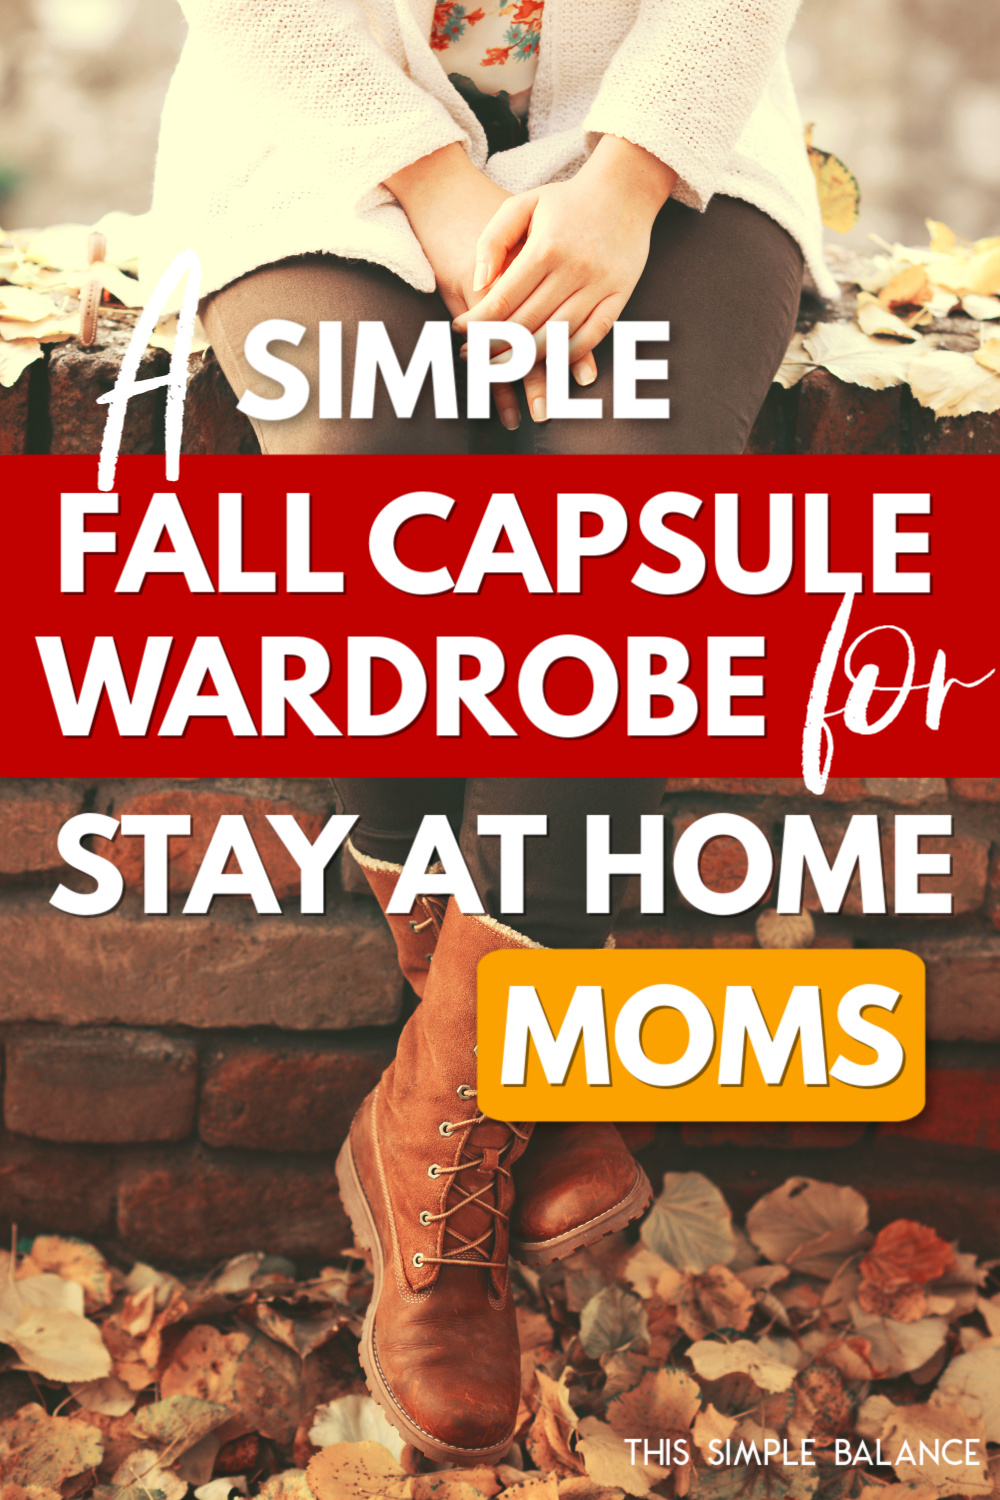 How to Build the Perfect Capsule Wardrobe For a Stay at Home Mom